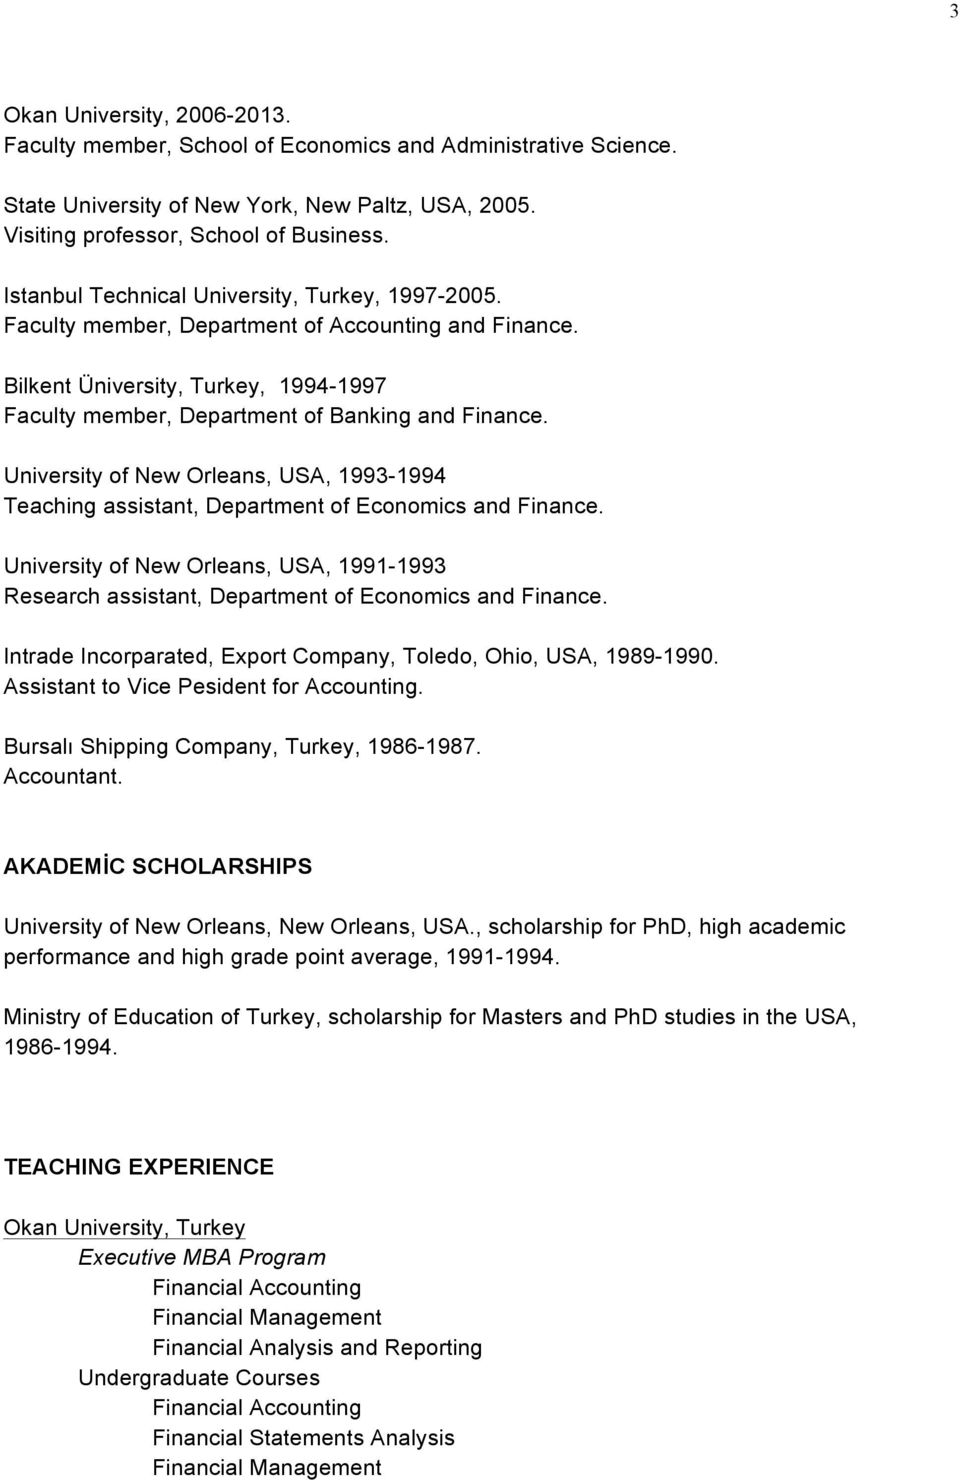 University of New Orleans, USA, 1993-1994 Teaching assistant, Department of Economics and Finance. University of New Orleans, USA, 1991-1993 Research assistant, Department of Economics and Finance.